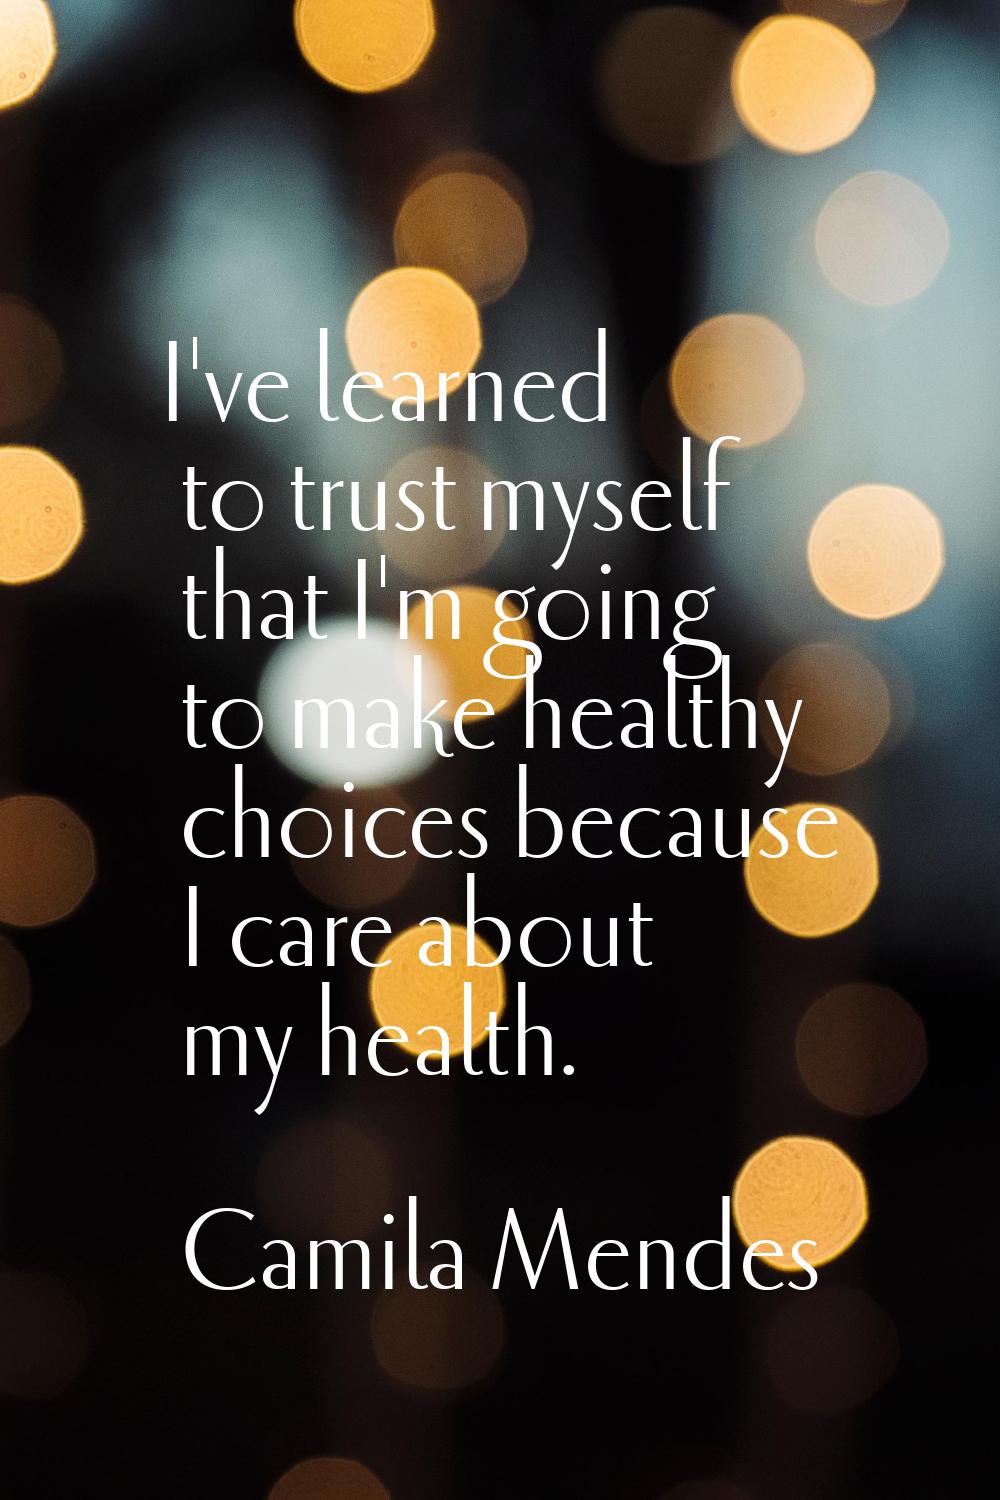 I've learned to trust myself that I'm going to make healthy choices because I care about my health.